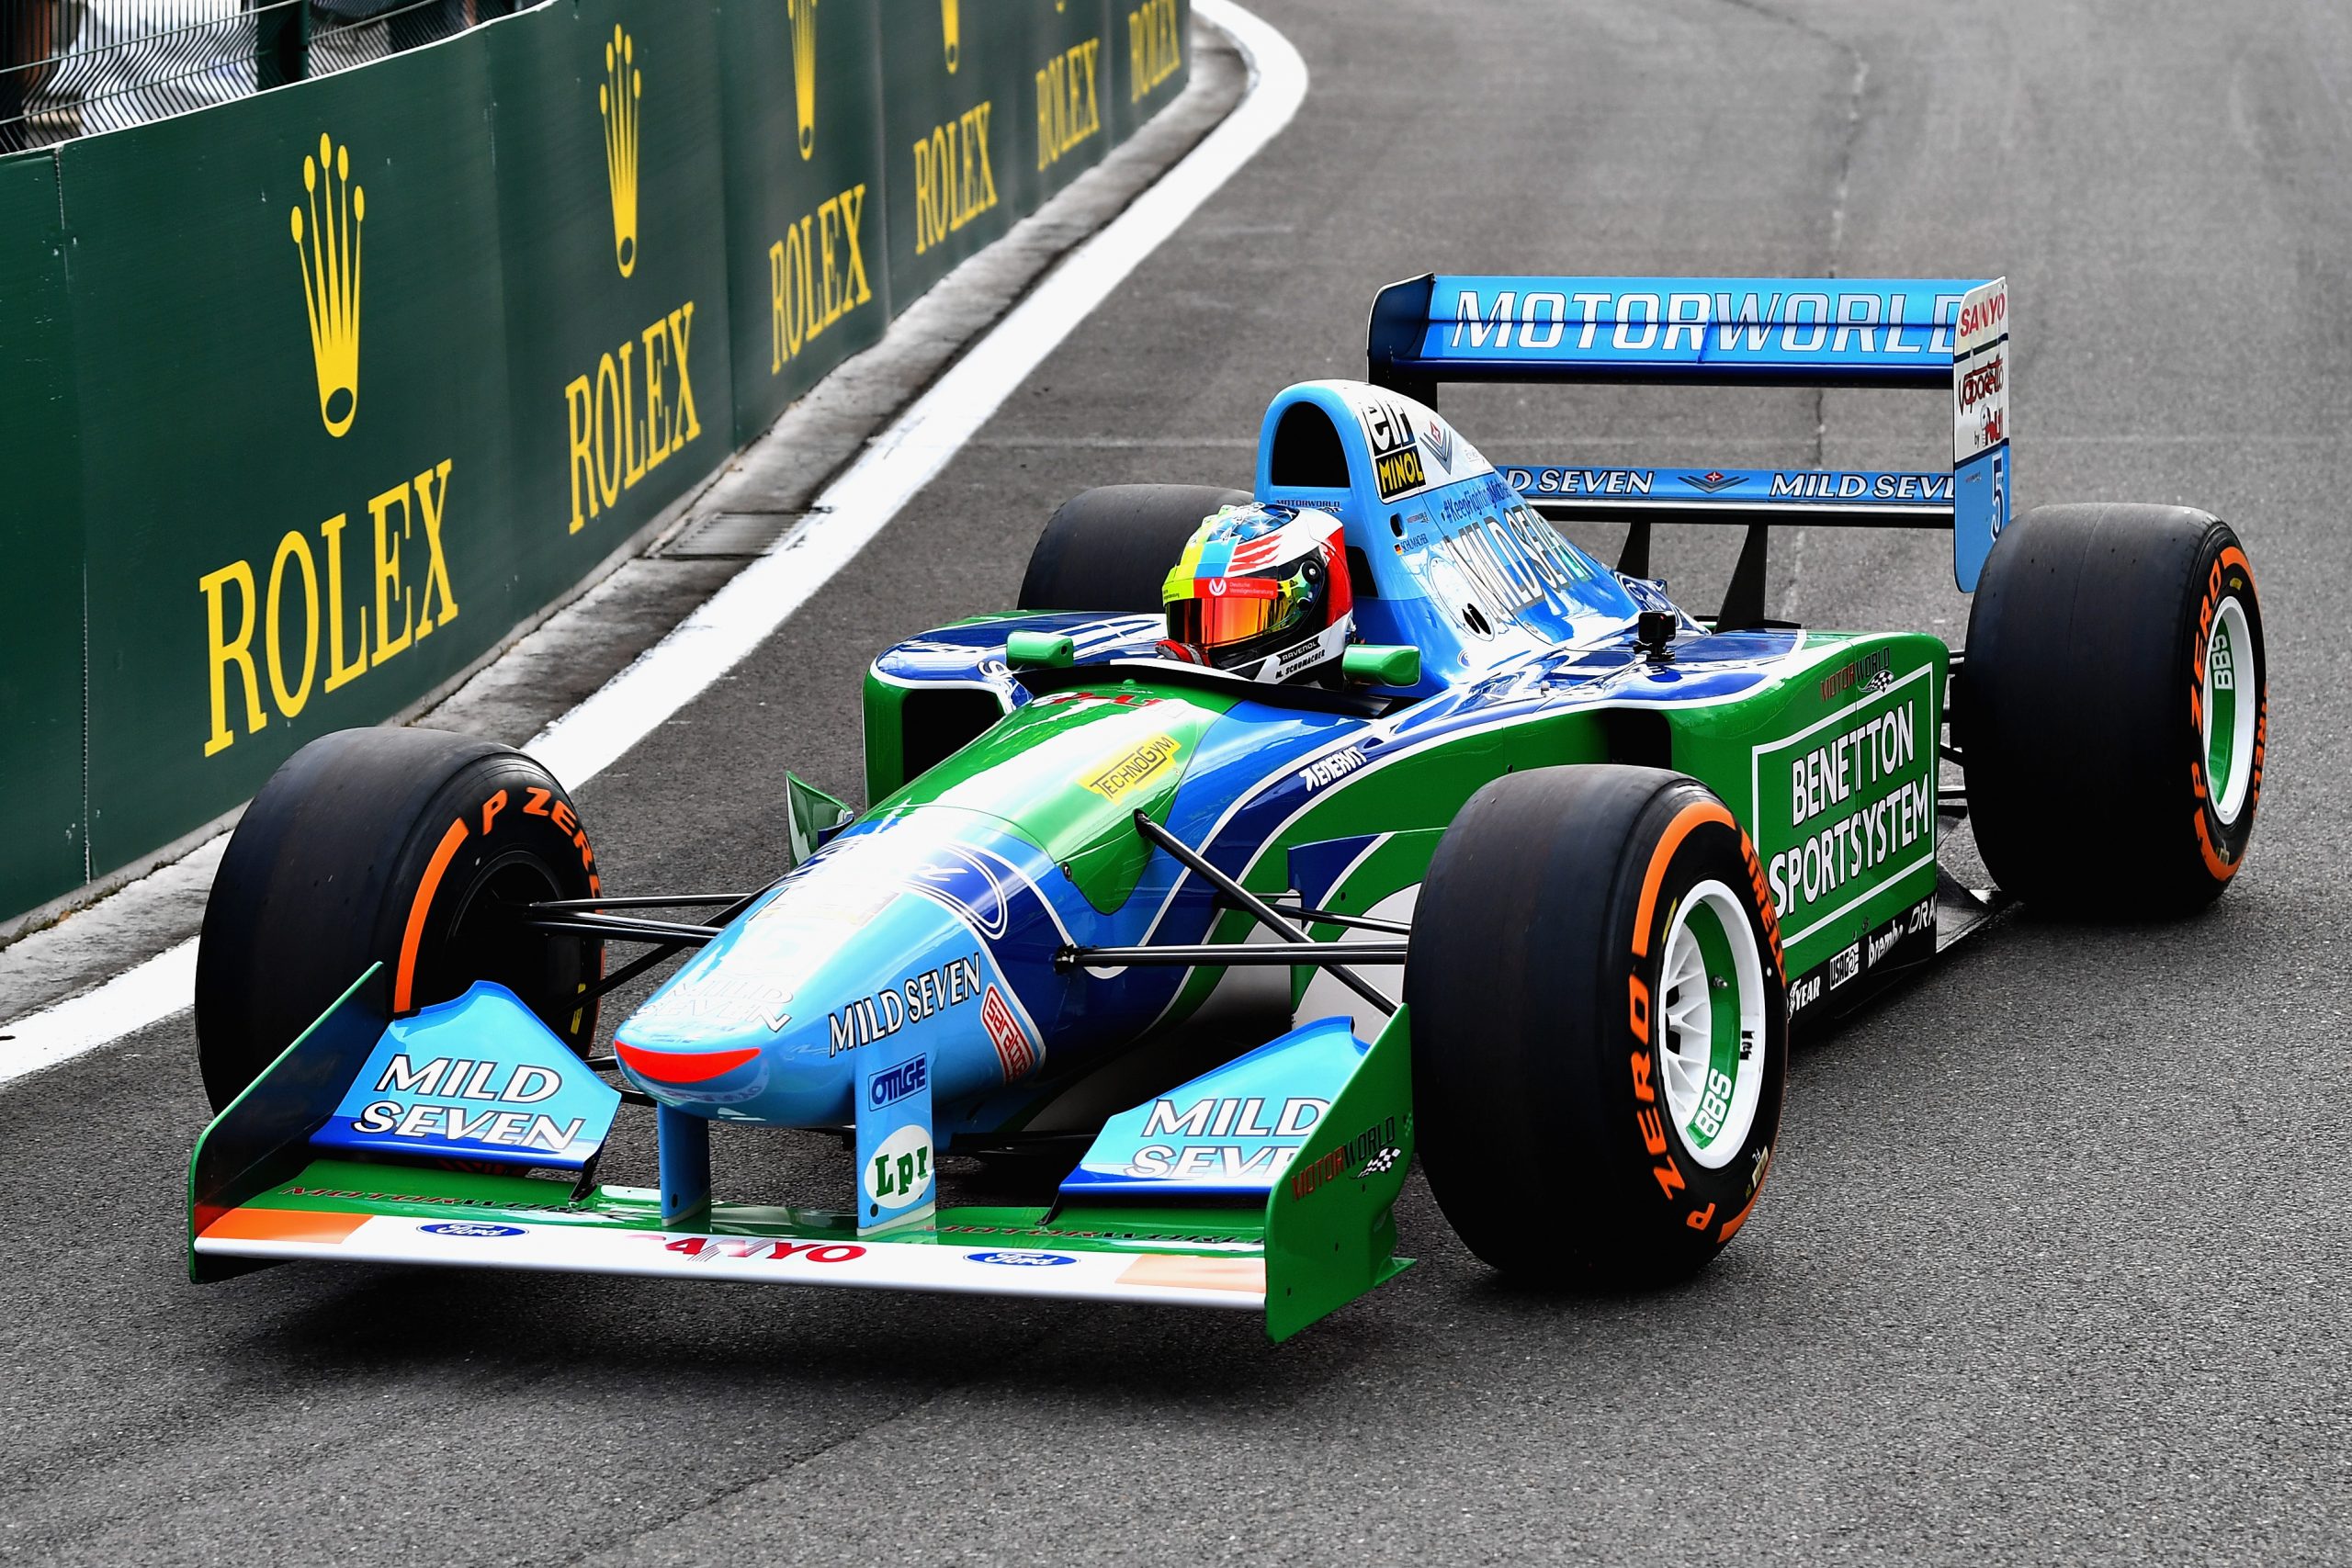 The green and white Benetton B194 Formula 1 car